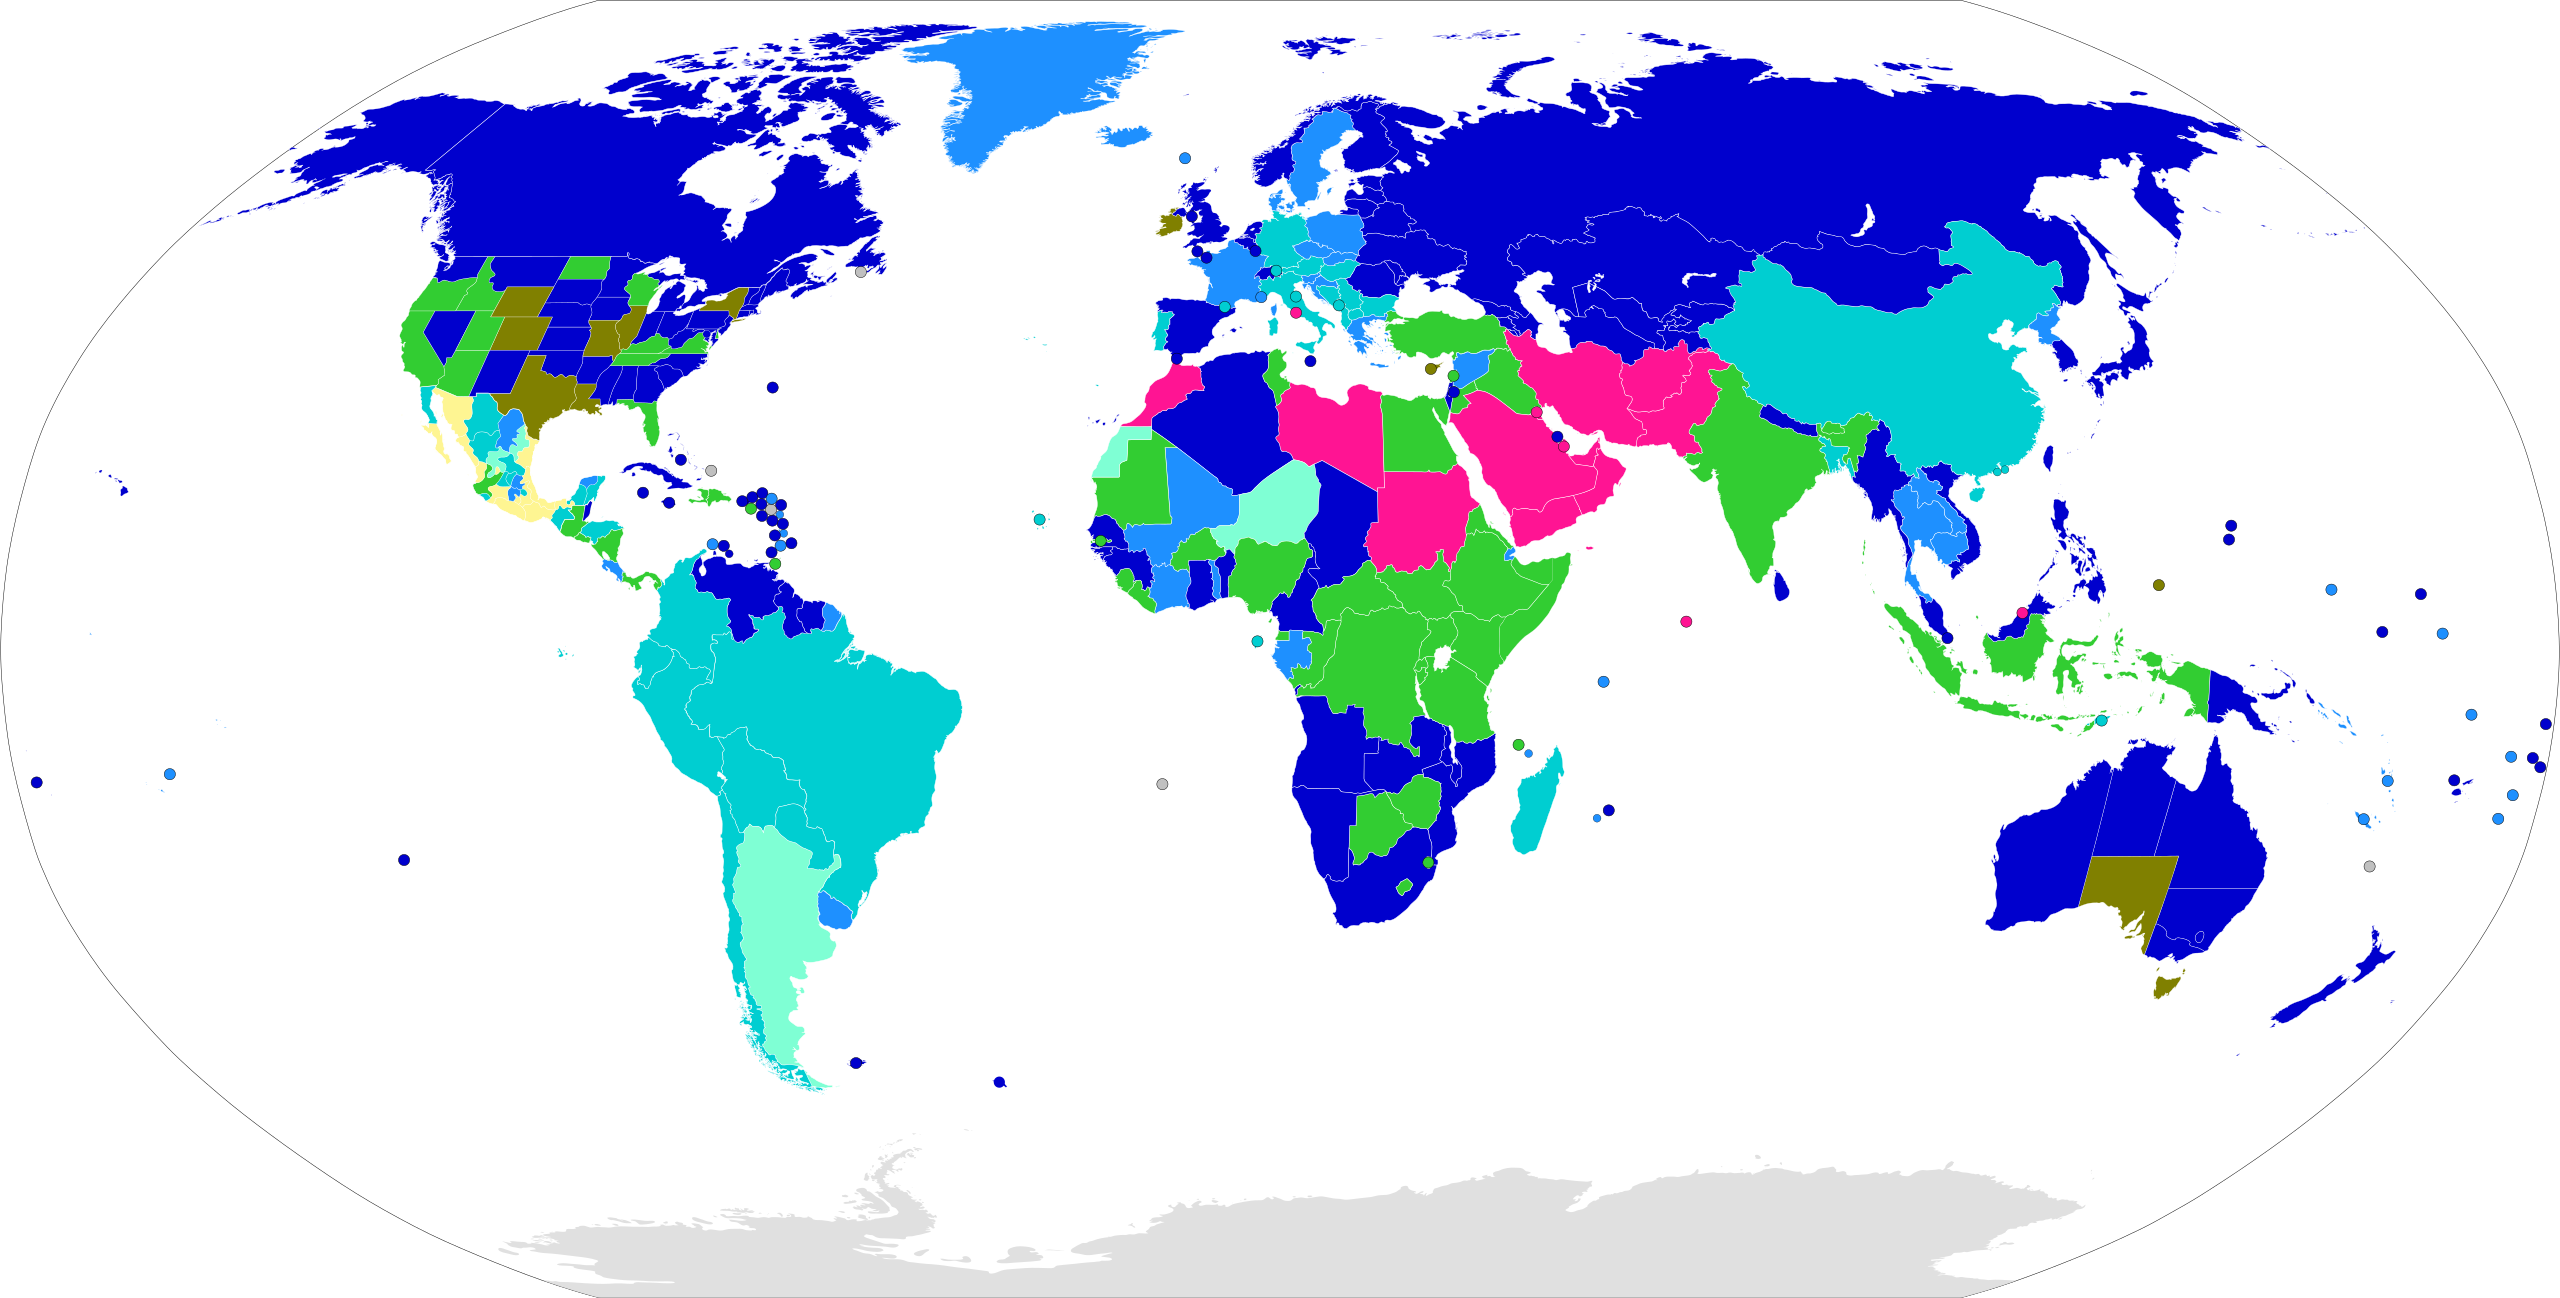 File:Age of Consent - Global.svg - Wikimedia Commons